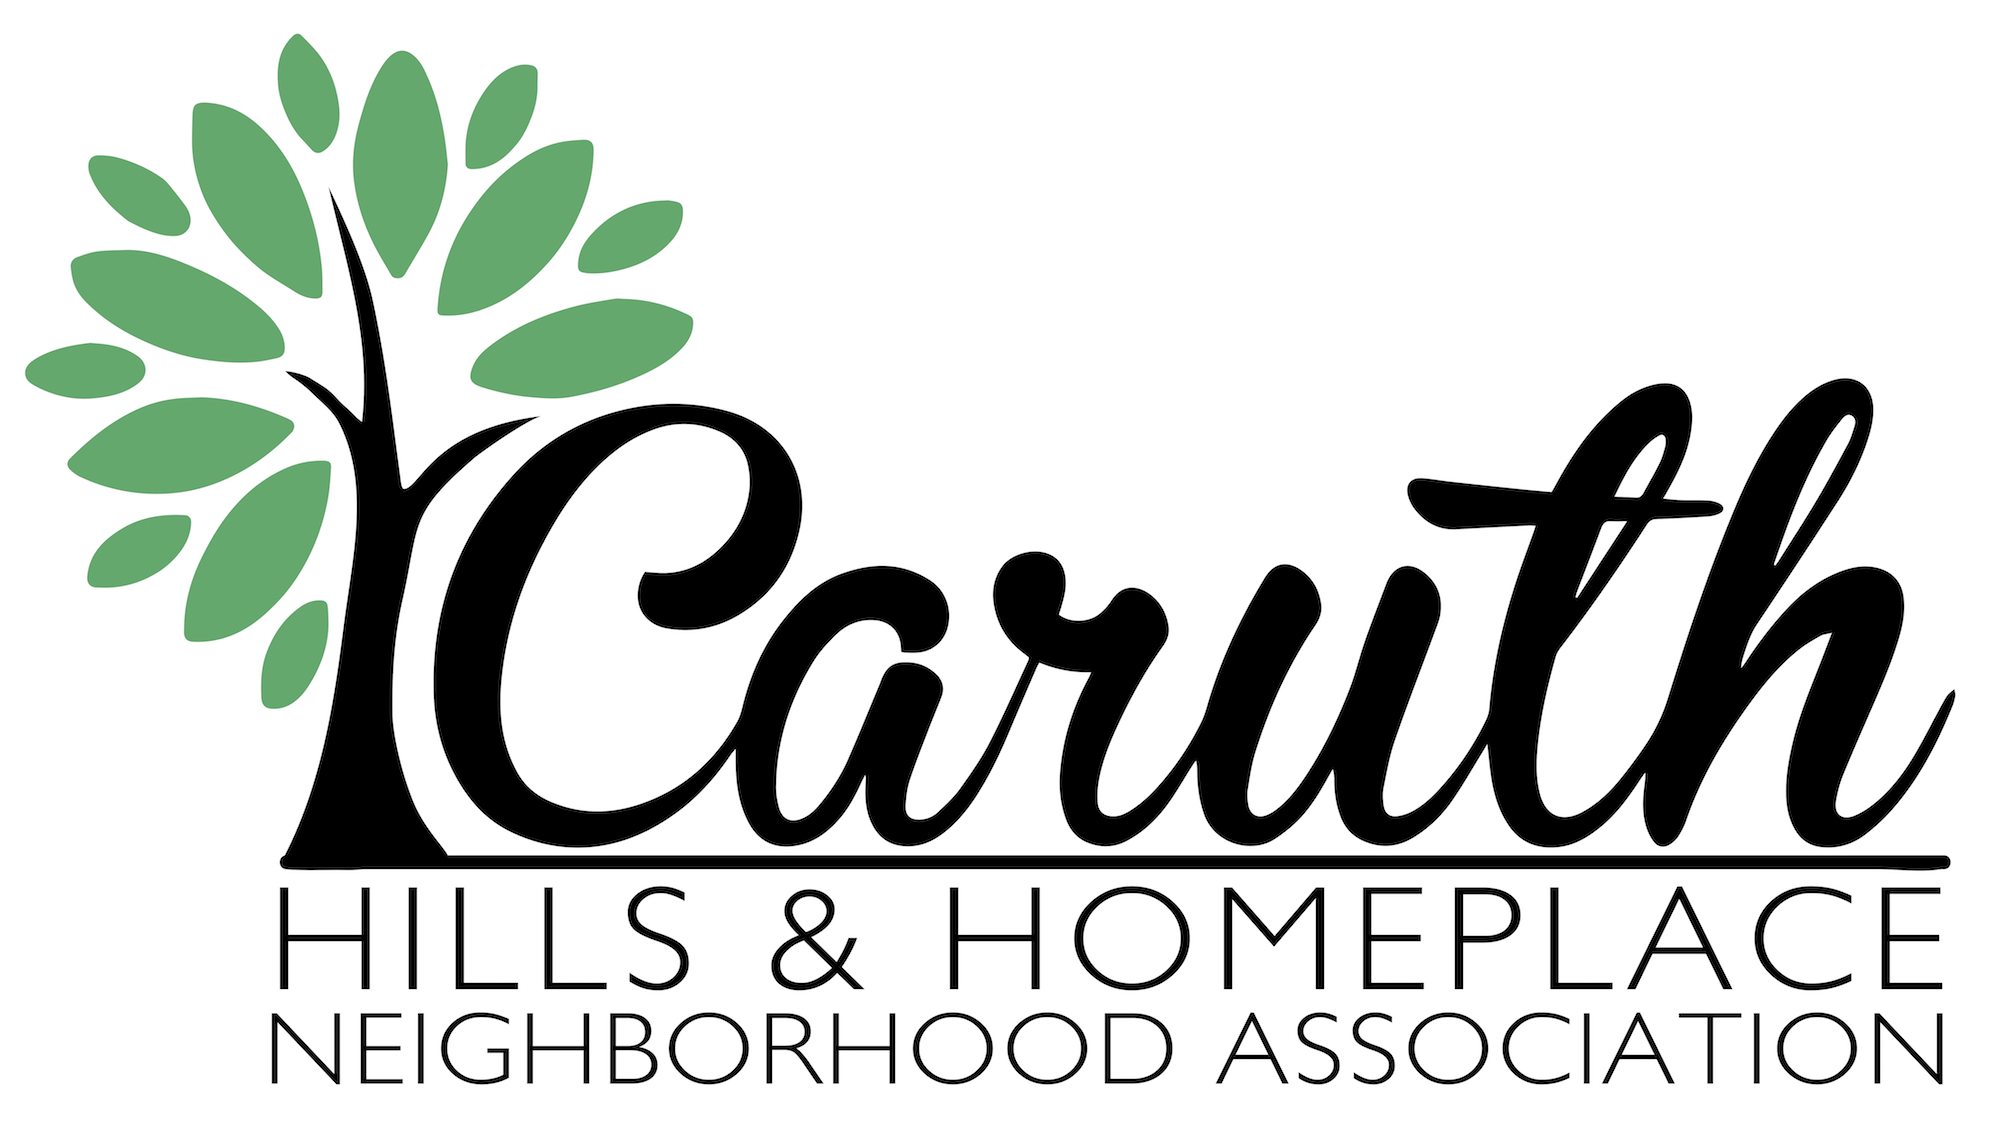 Caruth Hills and Homeplace Neighborhood Association